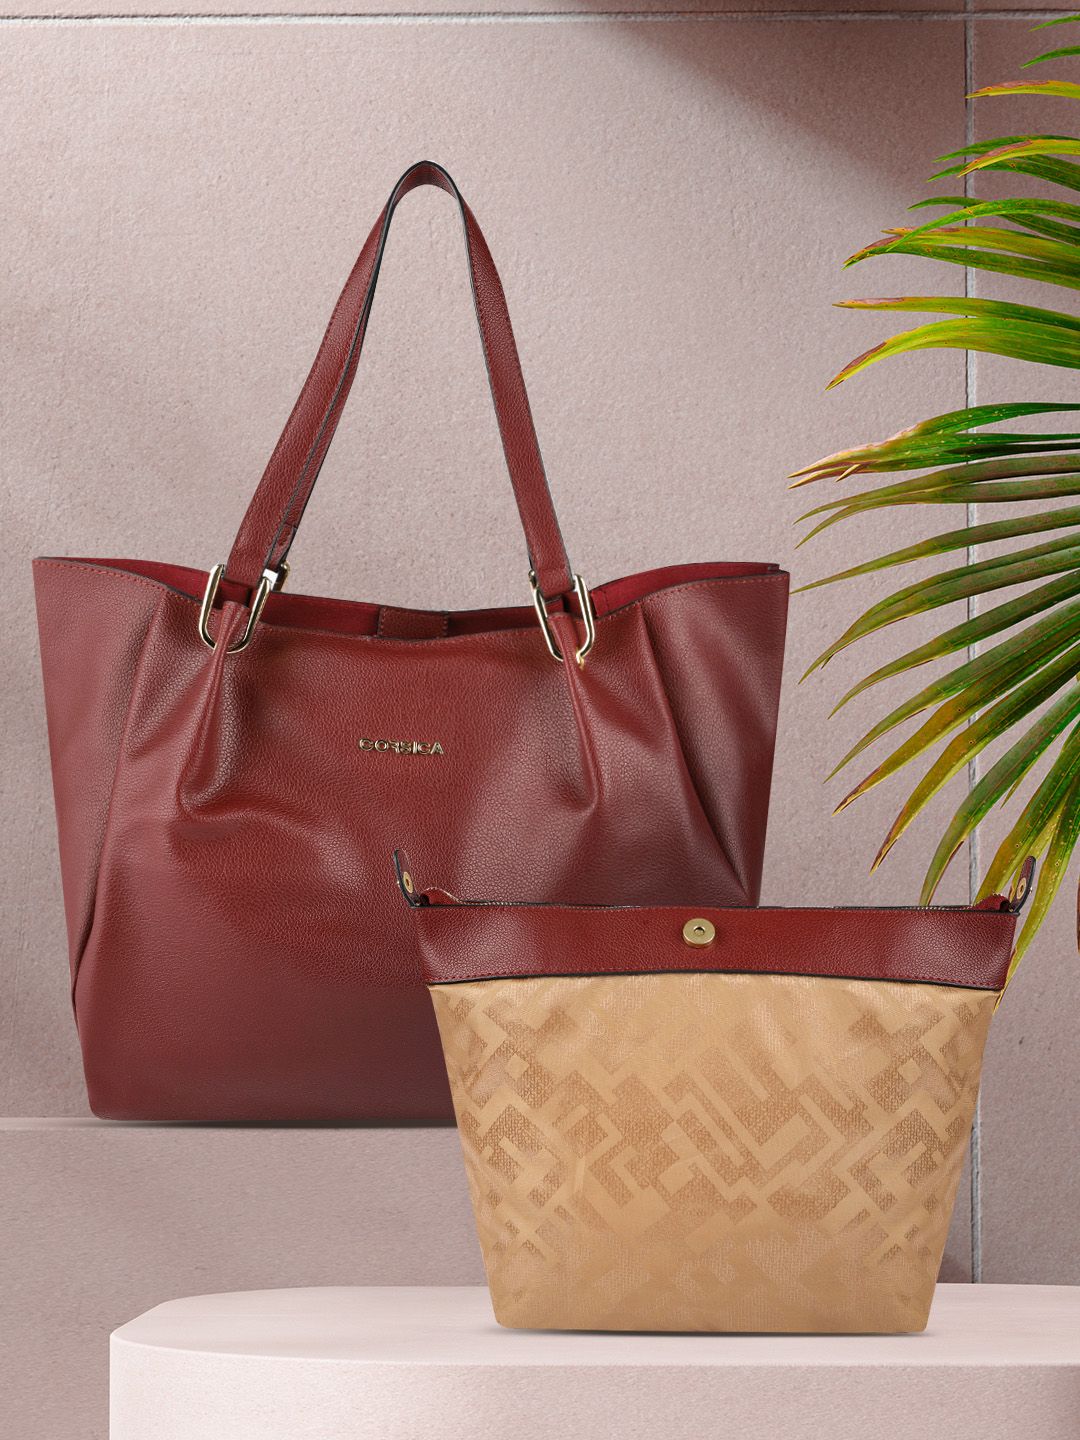 CORSICA Burgundy Structured Tote Bag With Pouch Price in India